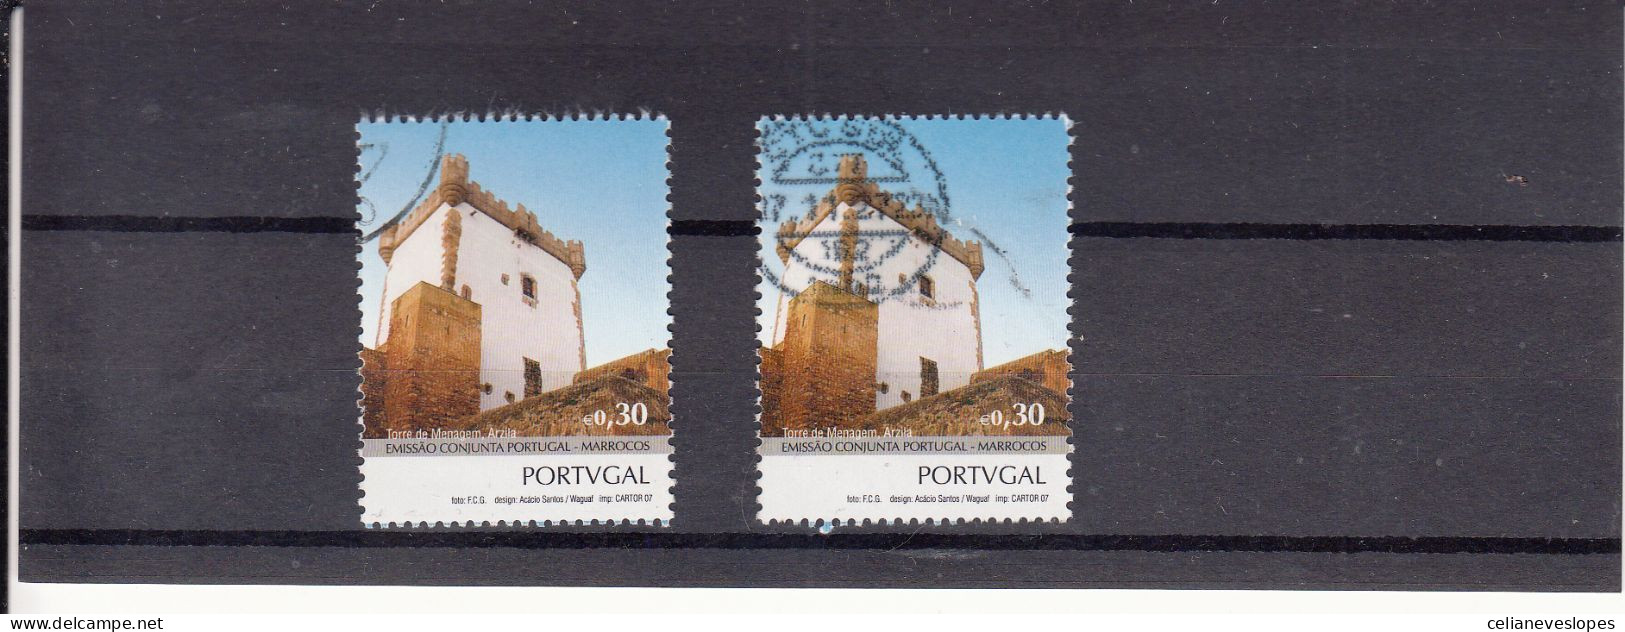 Portugal, Portugal - Marrocos, 2007, Mundifil Nº 3632 A 3633 Used - Used Stamps